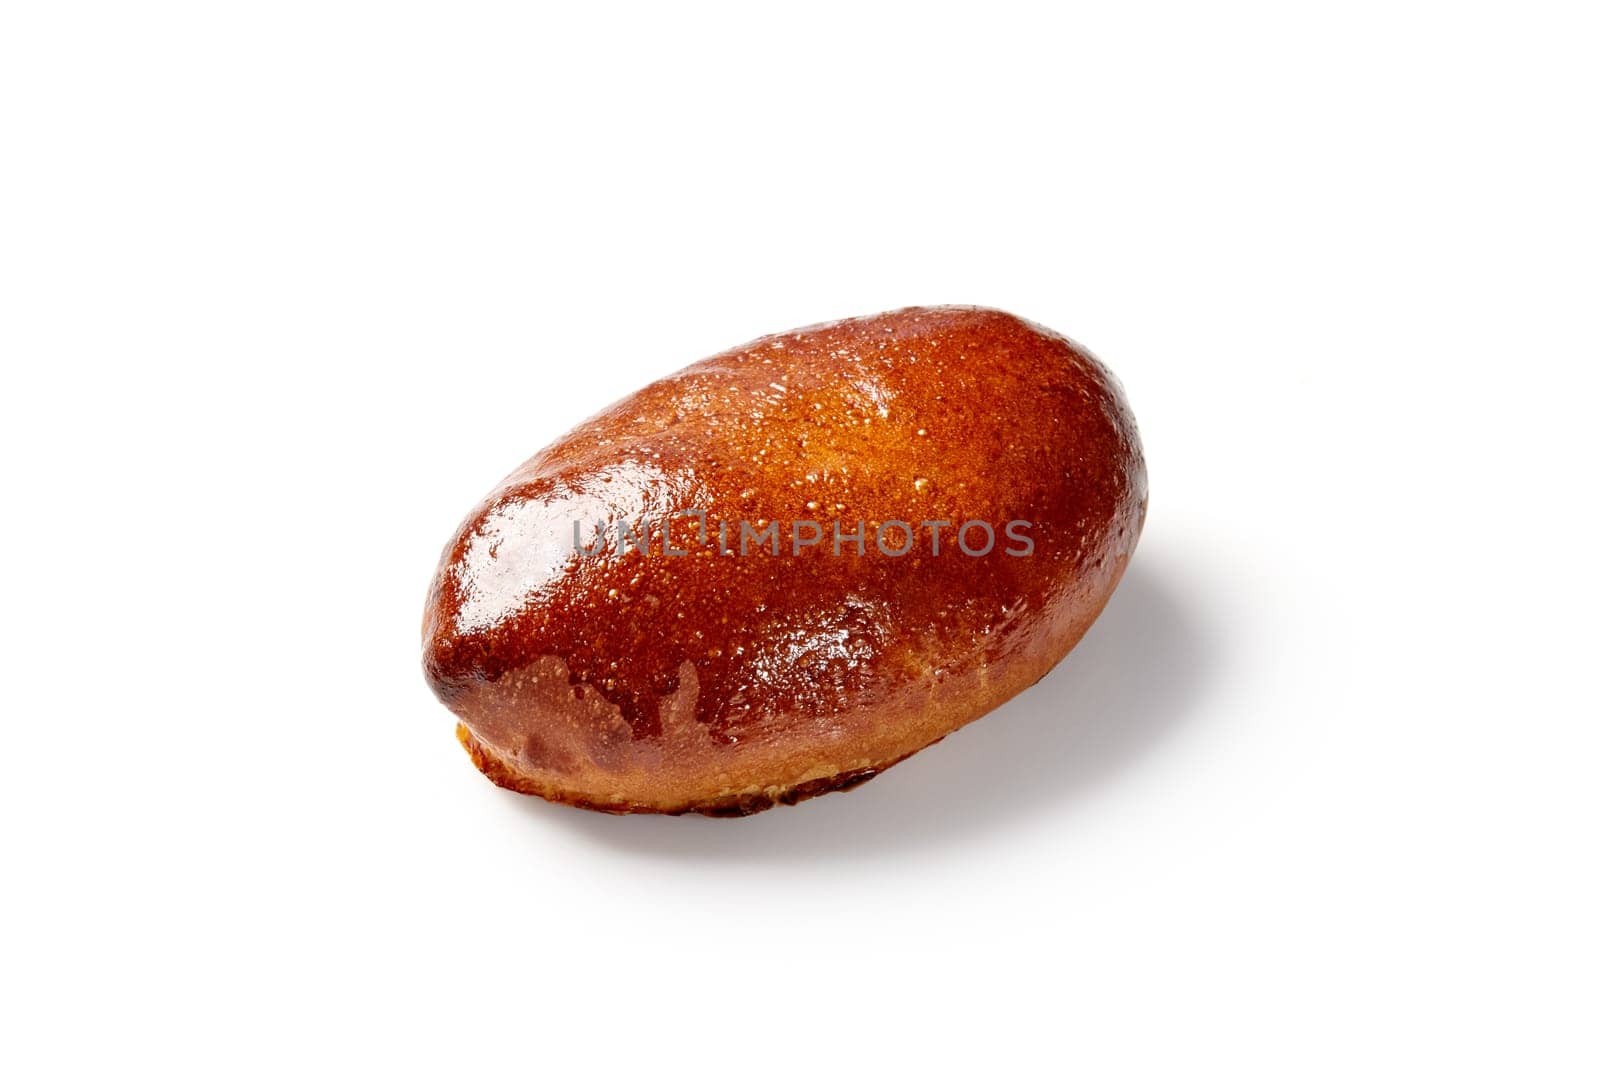 Golden-brown yeast leavened boat-shaped bun with glistening glaze and filling, isolated on white background. Popular comfort food in Eastern Europe